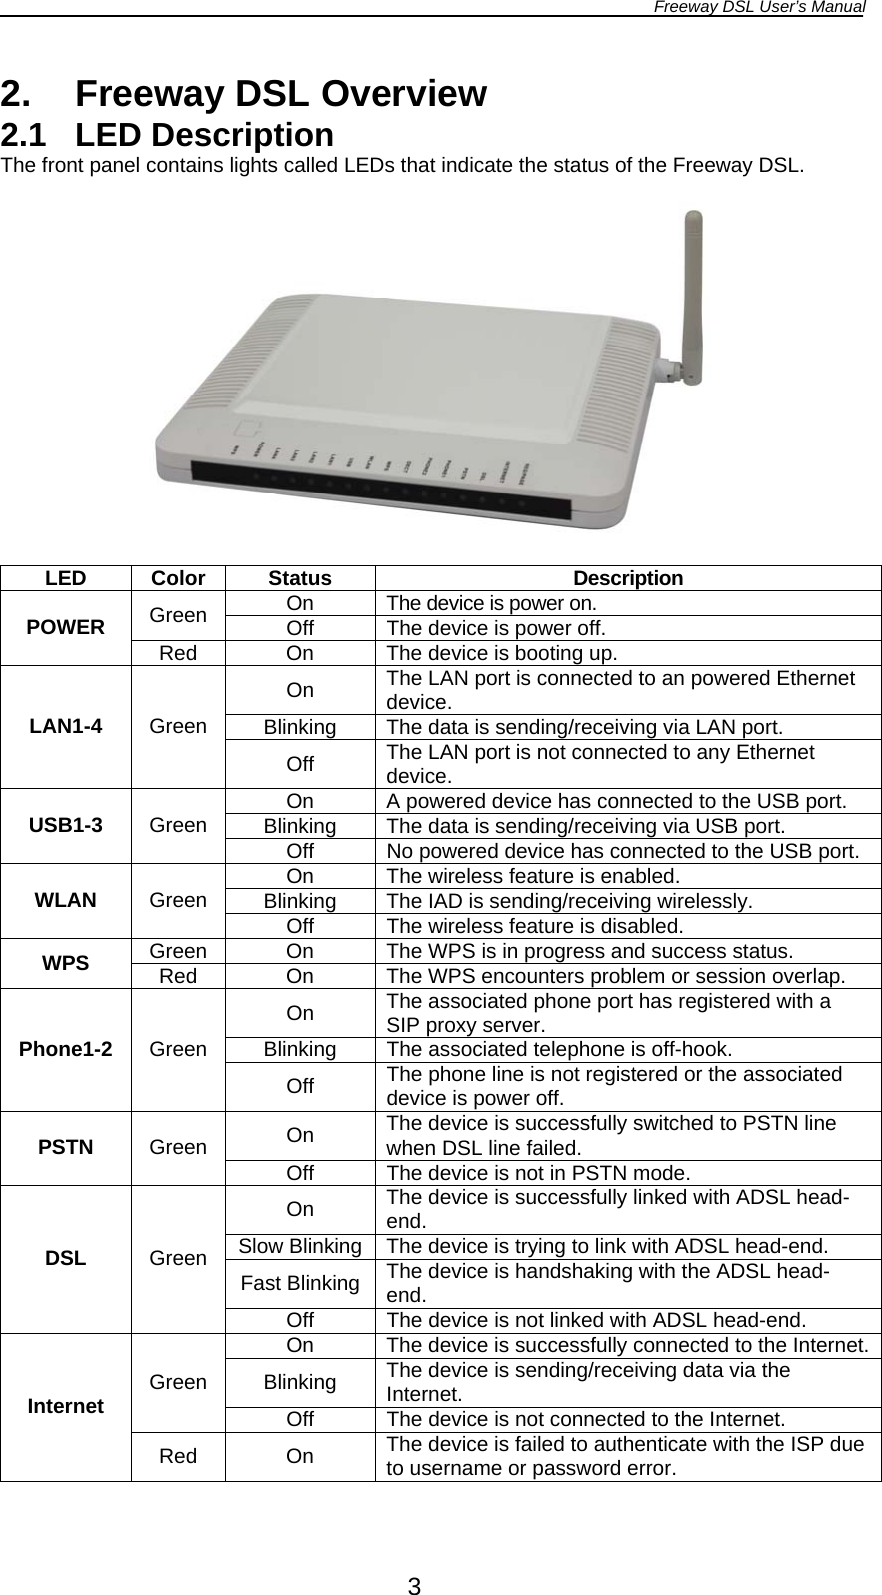 Freeway DSL User’s Manual  3 2.  Freeway DSL Overview 2.1 LED Description The front panel contains lights called LEDs that indicate the status of the Freeway DSL.    LED Color Status  Description On  The device is power on. Green  Off  The device is power off. POWER  Red  On  The device is booting up. On  The LAN port is connected to an powered Ethernet device. Blinking  The data is sending/receiving via LAN port. LAN1-4  Green Off  The LAN port is not connected to any Ethernet device. On  A powered device has connected to the USB port. Blinking  The data is sending/receiving via USB port. USB1-3  Green  Off  No powered device has connected to the USB port. On  The wireless feature is enabled. Blinking  The IAD is sending/receiving wirelessly. WLAN  Green  Off  The wireless feature is disabled. Green  On  The WPS is in progress and success status. WPS  Red  On  The WPS encounters problem or session overlap. On  The associated phone port has registered with a SIP proxy server. Blinking  The associated telephone is off-hook. Phone1-2  Green Off  The phone line is not registered or the associated device is power off. On  The device is successfully switched to PSTN line when DSL line failed. PSTN  Green  Off  The device is not in PSTN mode. On  The device is successfully linked with ADSL head-end. Slow Blinking The device is trying to link with ADSL head-end. Fast Blinking The device is handshaking with the ADSL head-end. DSL  Green Off  The device is not linked with ADSL head-end. On  The device is successfully connected to the Internet.Blinking  The device is sending/receiving data via the Internet. Green Off  The device is not connected to the Internet. Internet Red On The device is failed to authenticate with the ISP due to username or password error. 